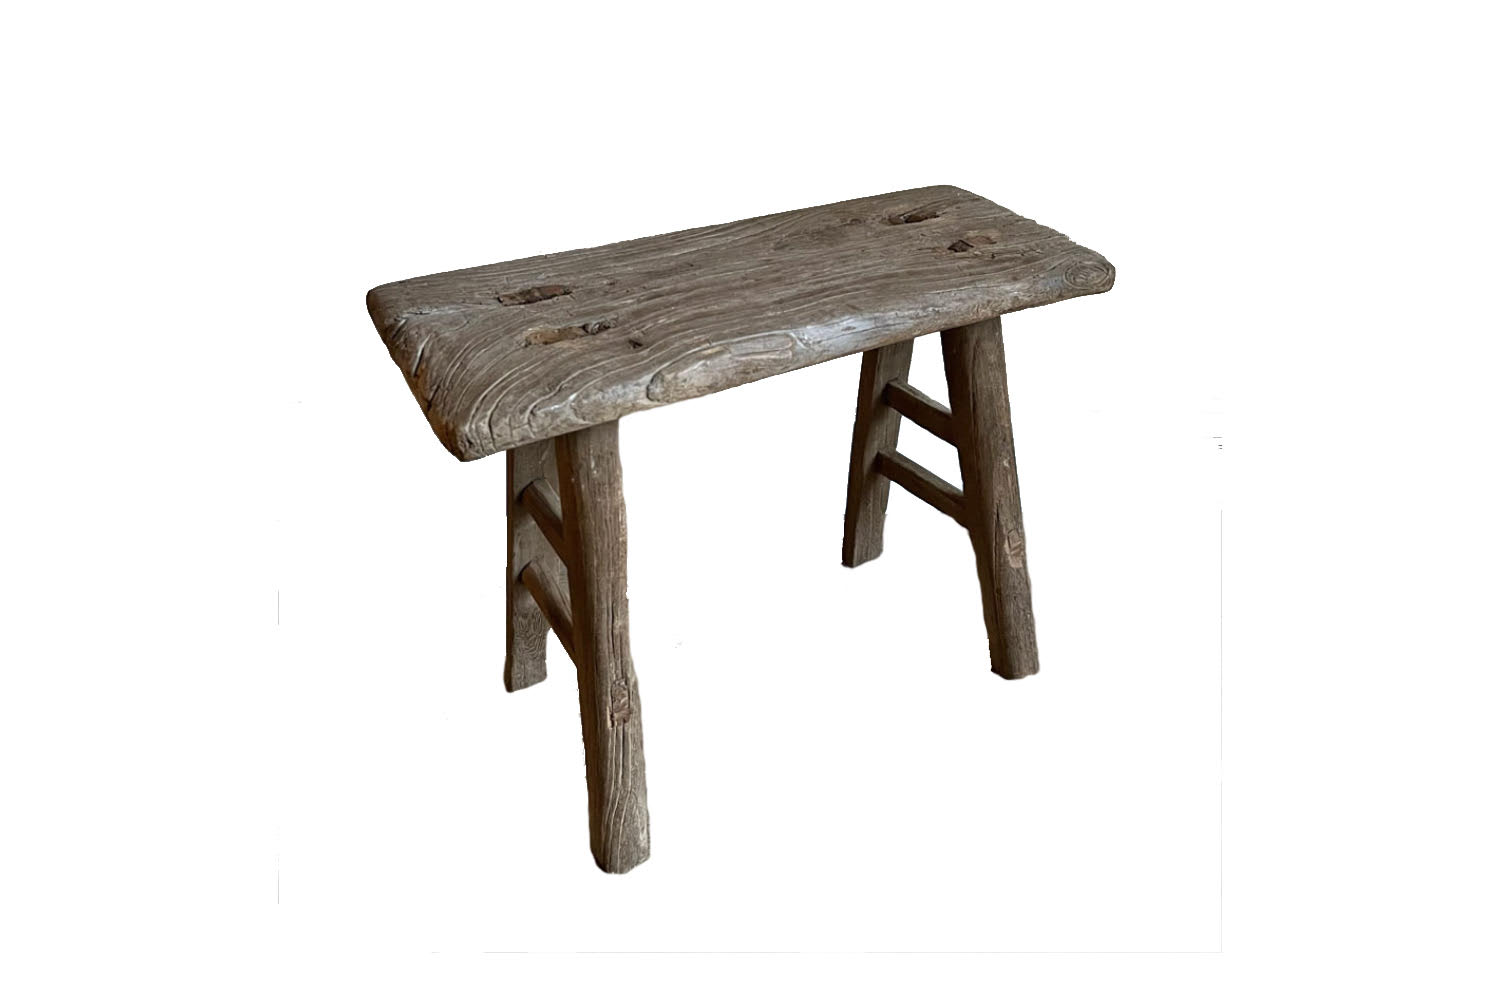 the stool is the antique side table large stool from home barn. 13